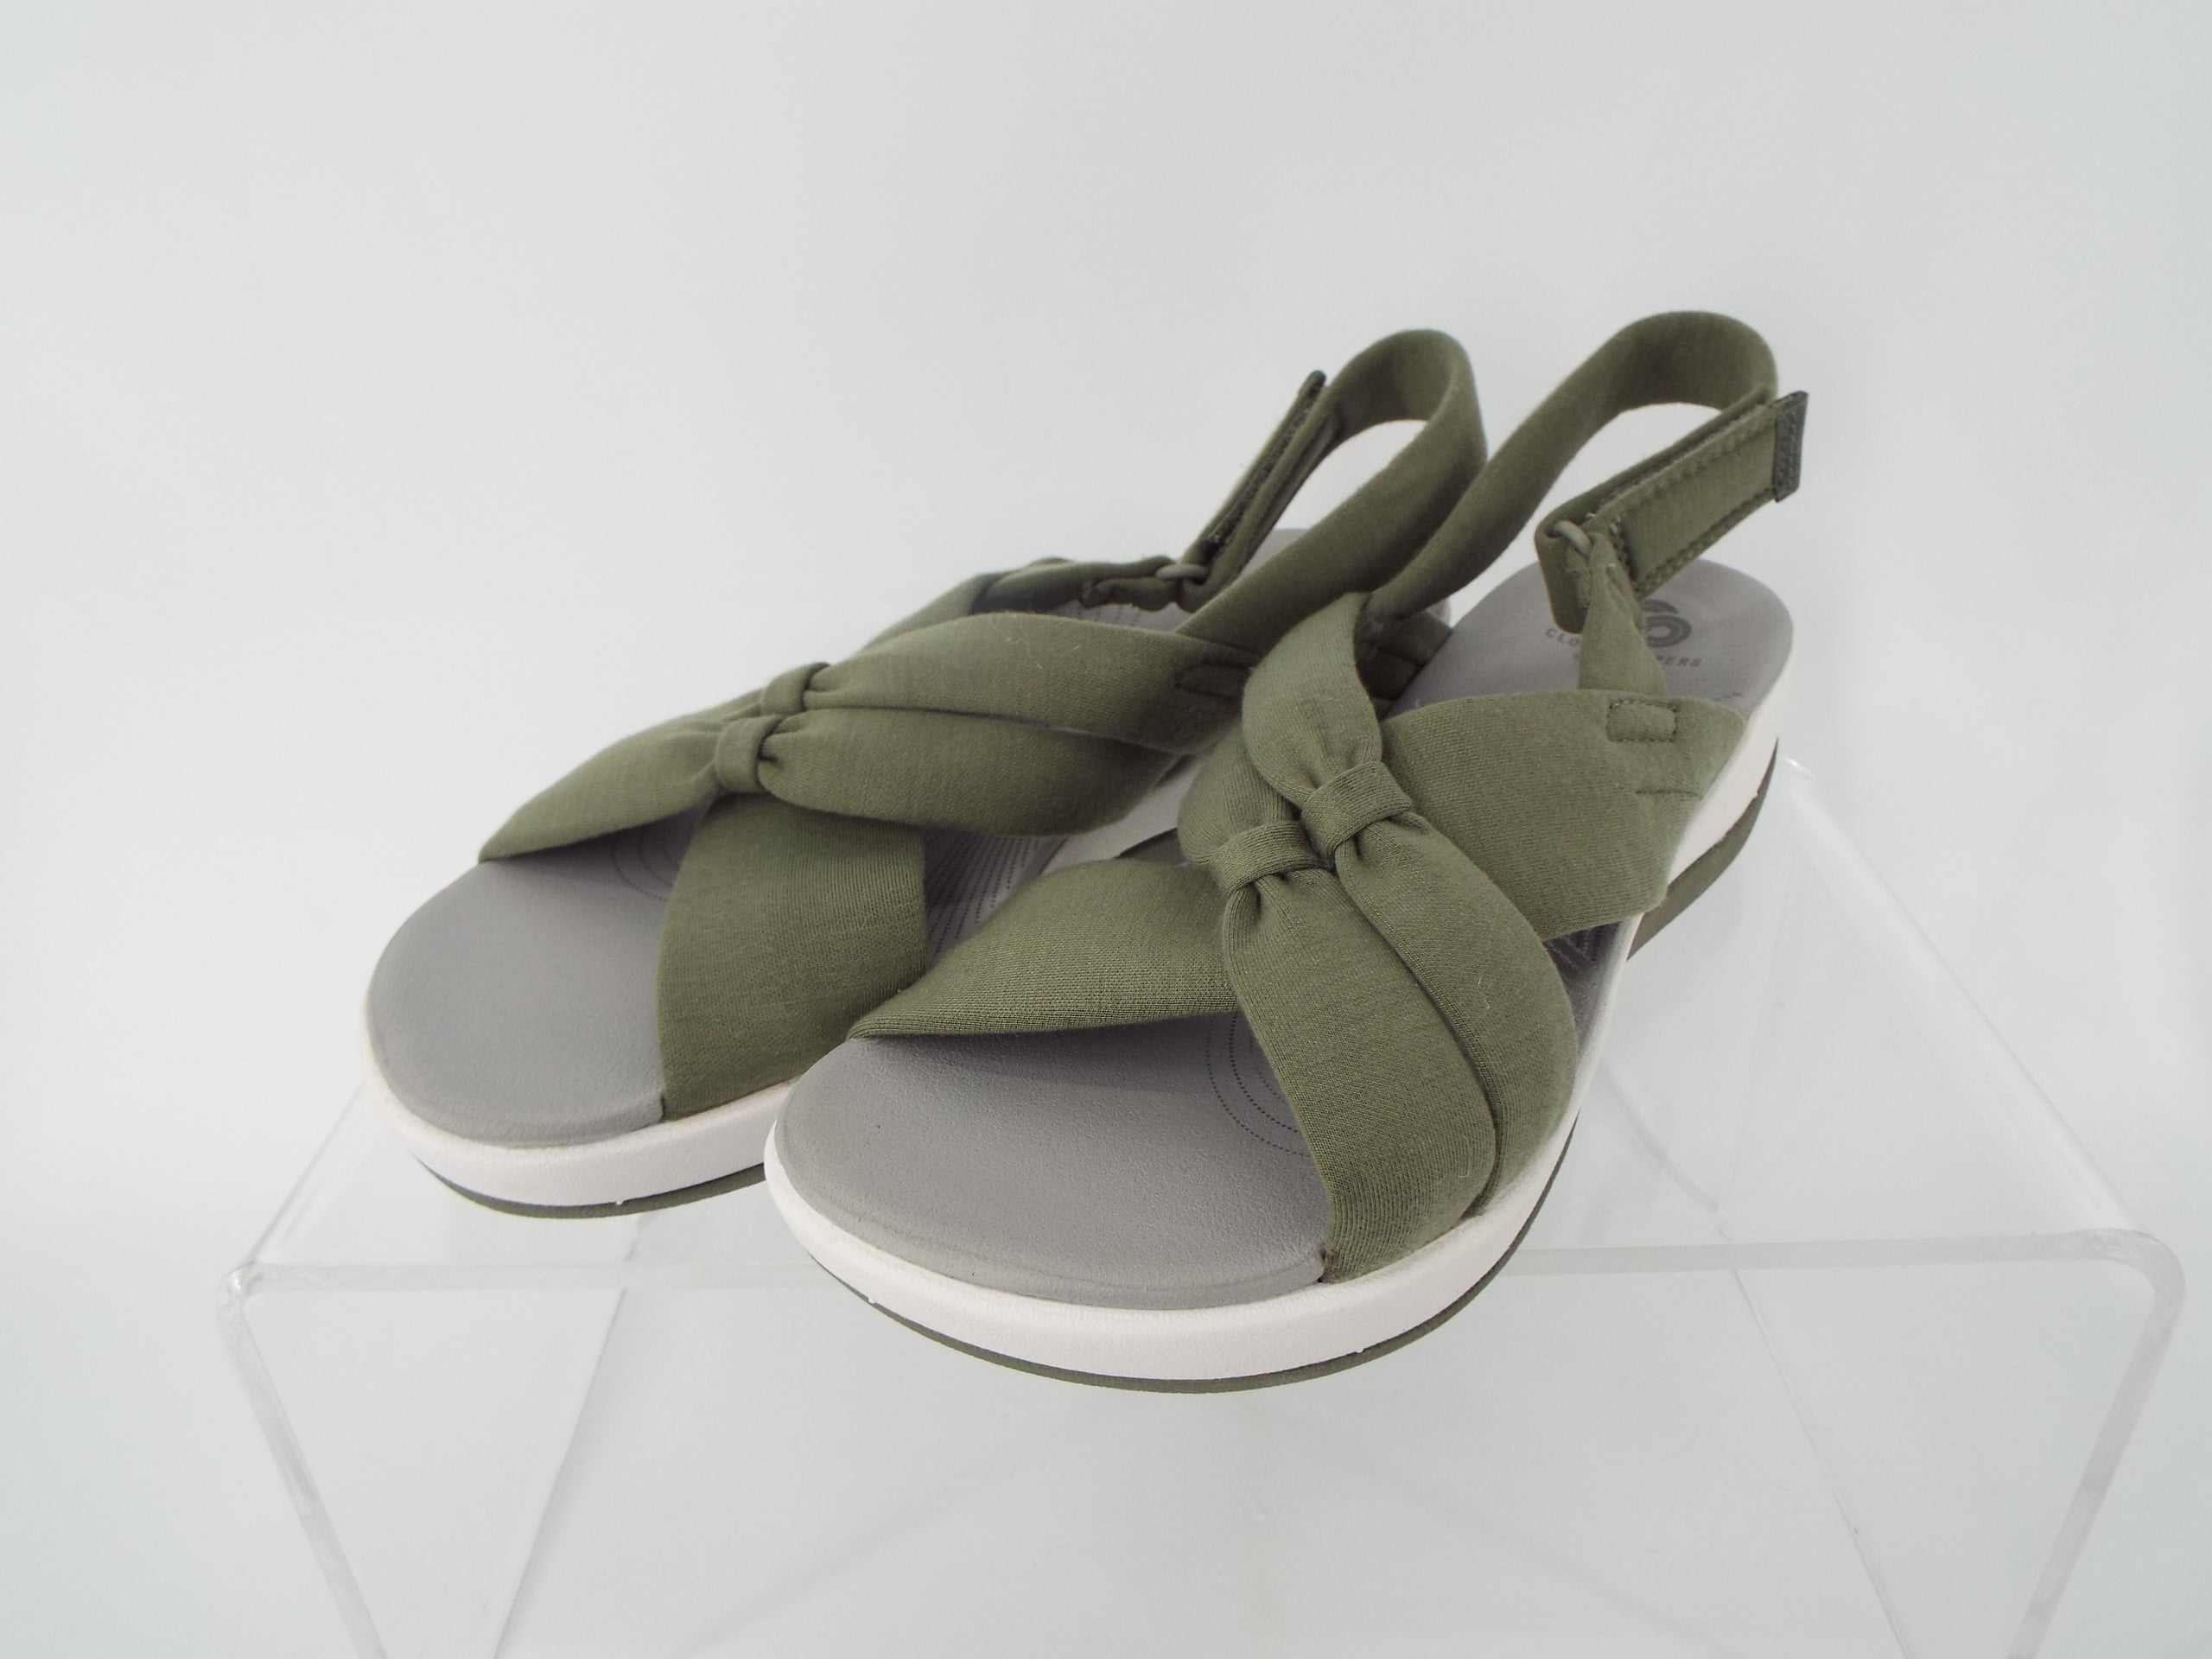 SOLD (Boutique Wall July 2022) - 60% OFF - Cloudsteppers by Clarks ...